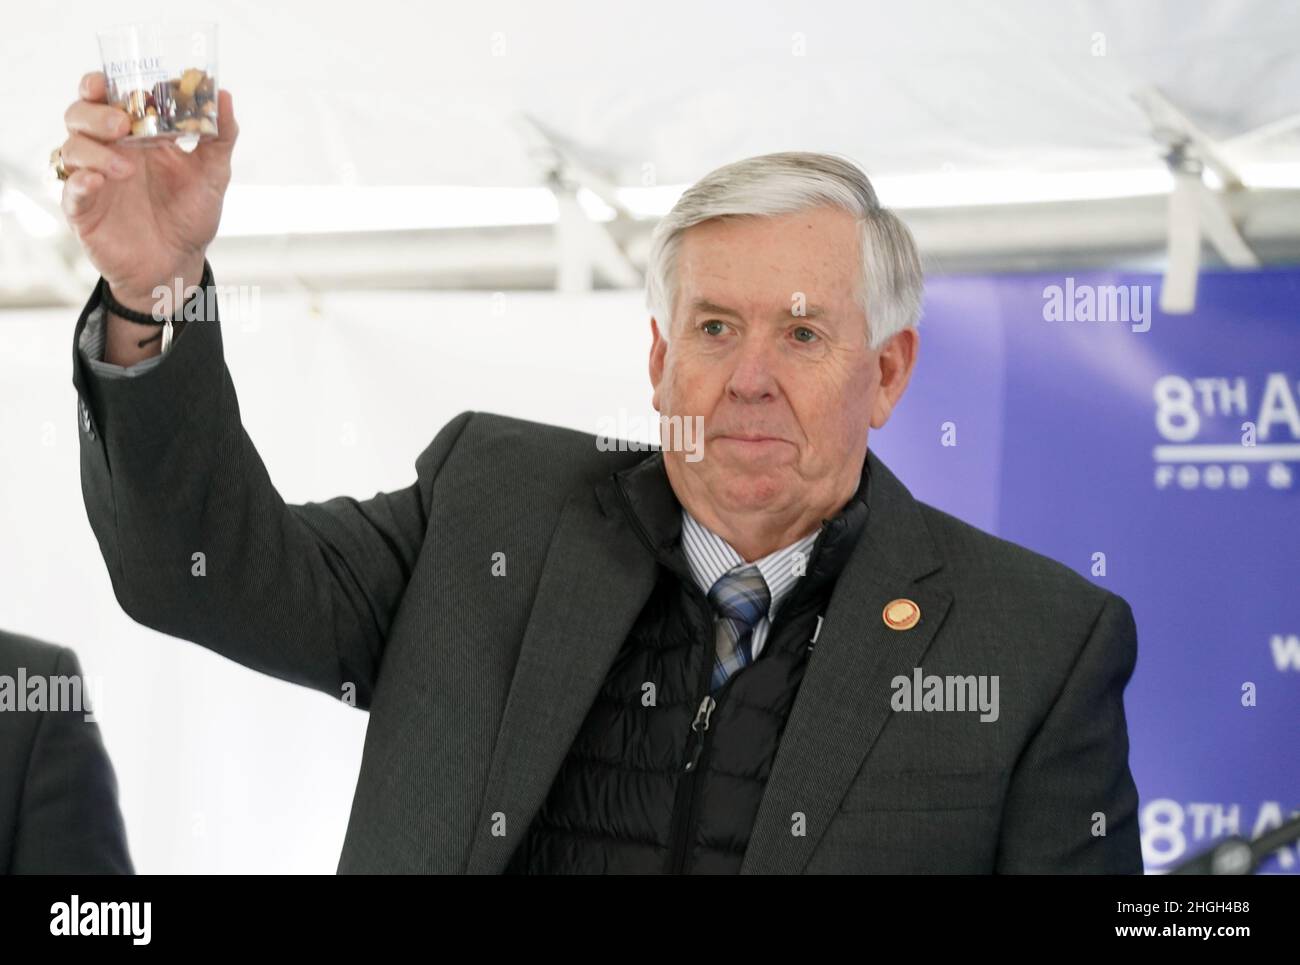 Hazelwood, United States. 21st Jan, 2022. Missouri Governor Mike Parson raises a cup of nuts and raisins before tasting during a ceremonial “first tasting” while officially opening 8th Avenue Food & Provisions, Inc. manufacturing plant in Hazelwood, Missouri on Thursday, January 20, 2022. 8th Avenue is relocating its fruit and nut manufacturing plant from Burnaby, British Columbia, Canada, to north St. Louis County and will bring more than 300 new jobs to the region. Photo by Bill Greenblatt/UPI Credit: UPI/Alamy Live News Stock Photo